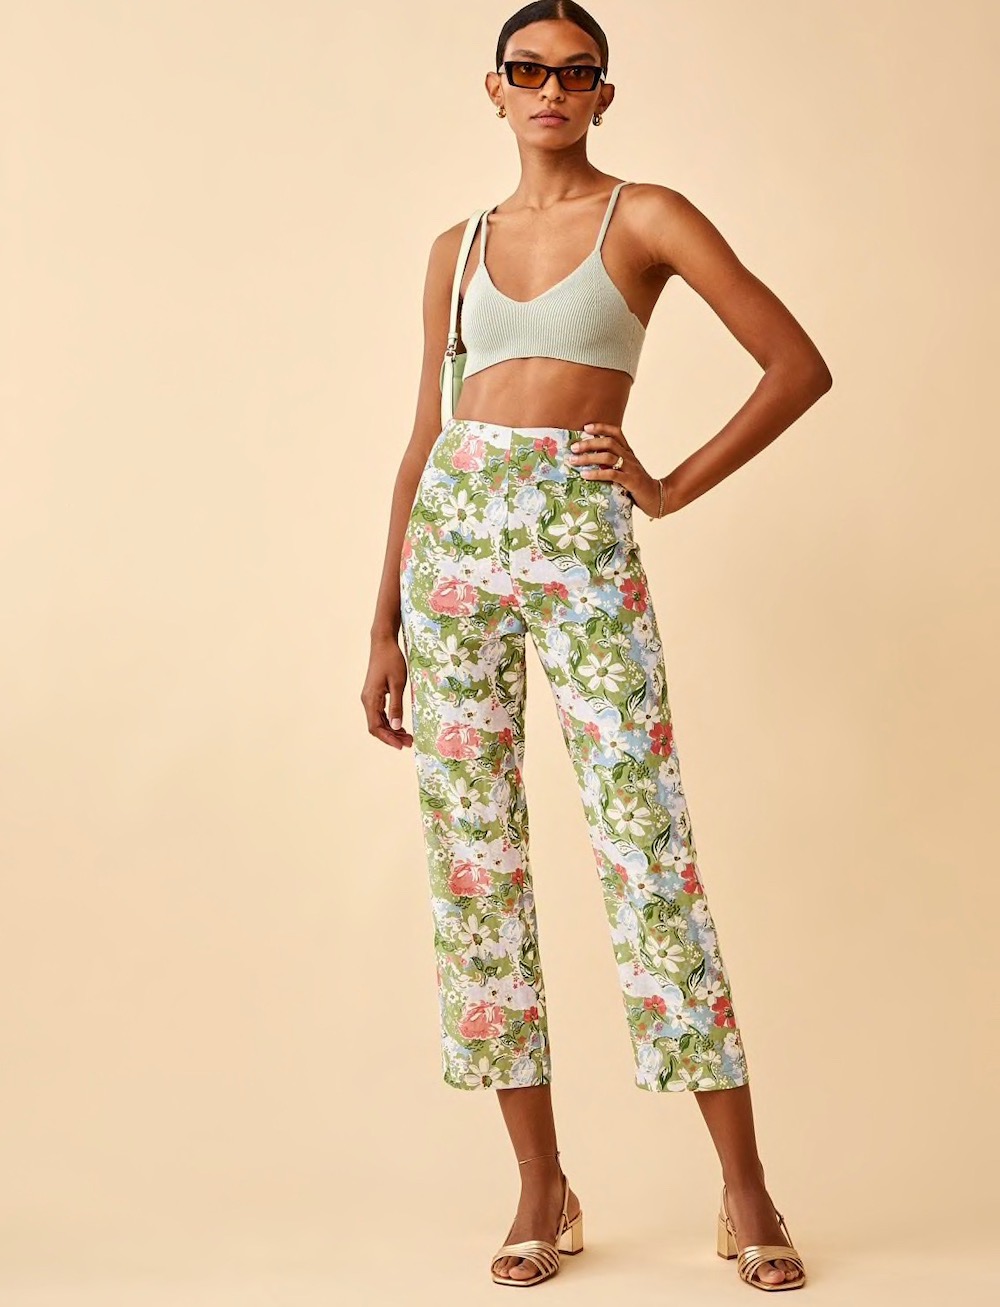 Cropped Pants to Wear With Summer Tops in Fall - theFashionSpot